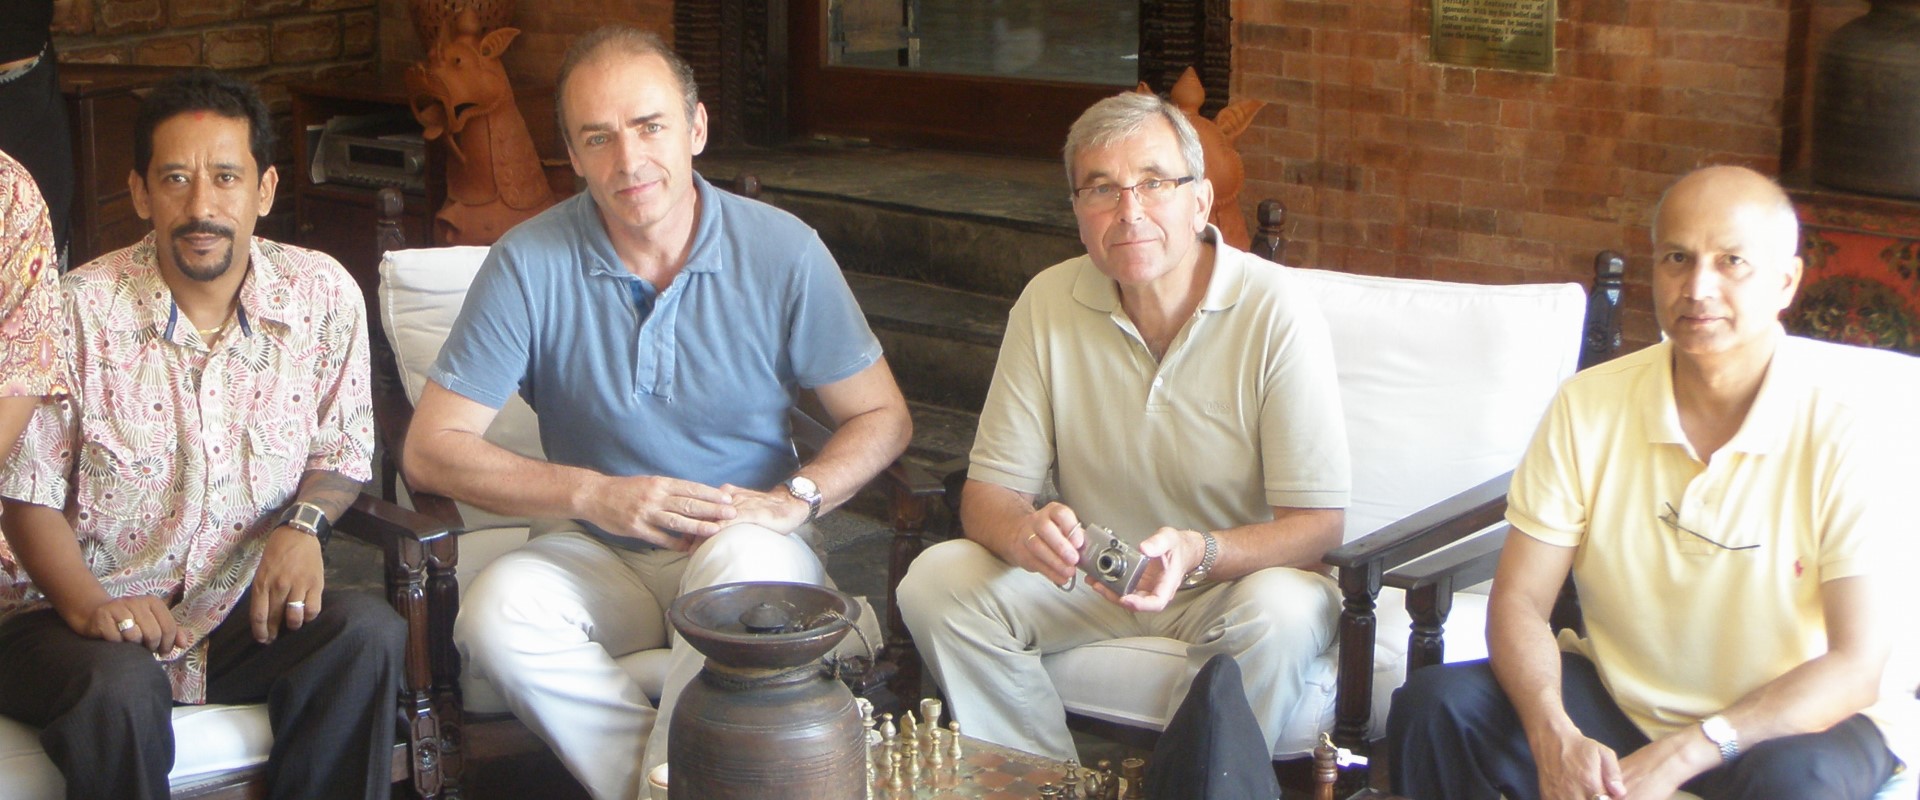 Making plans for the Nepal Music Centre in and a national music education program, 2007.